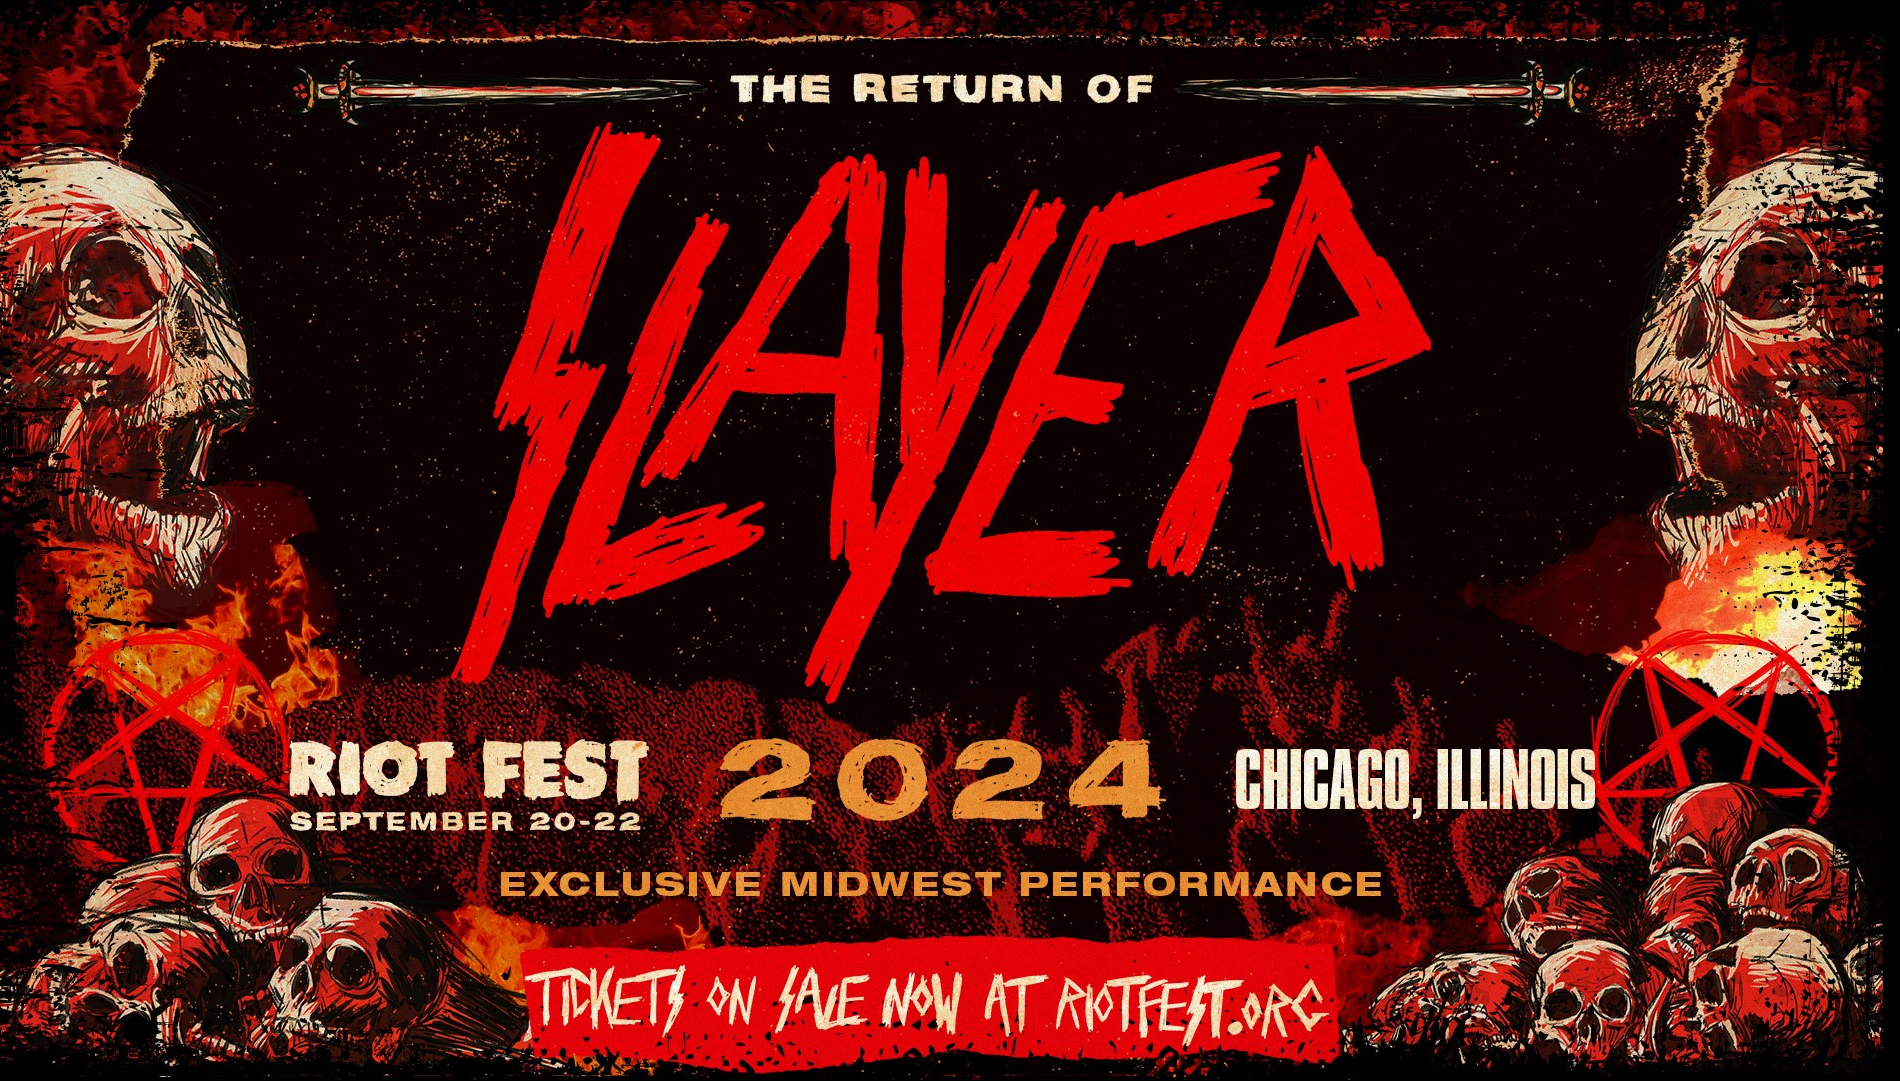 Your favorite metal band, Slayer is BACK and headlining Riot Fest